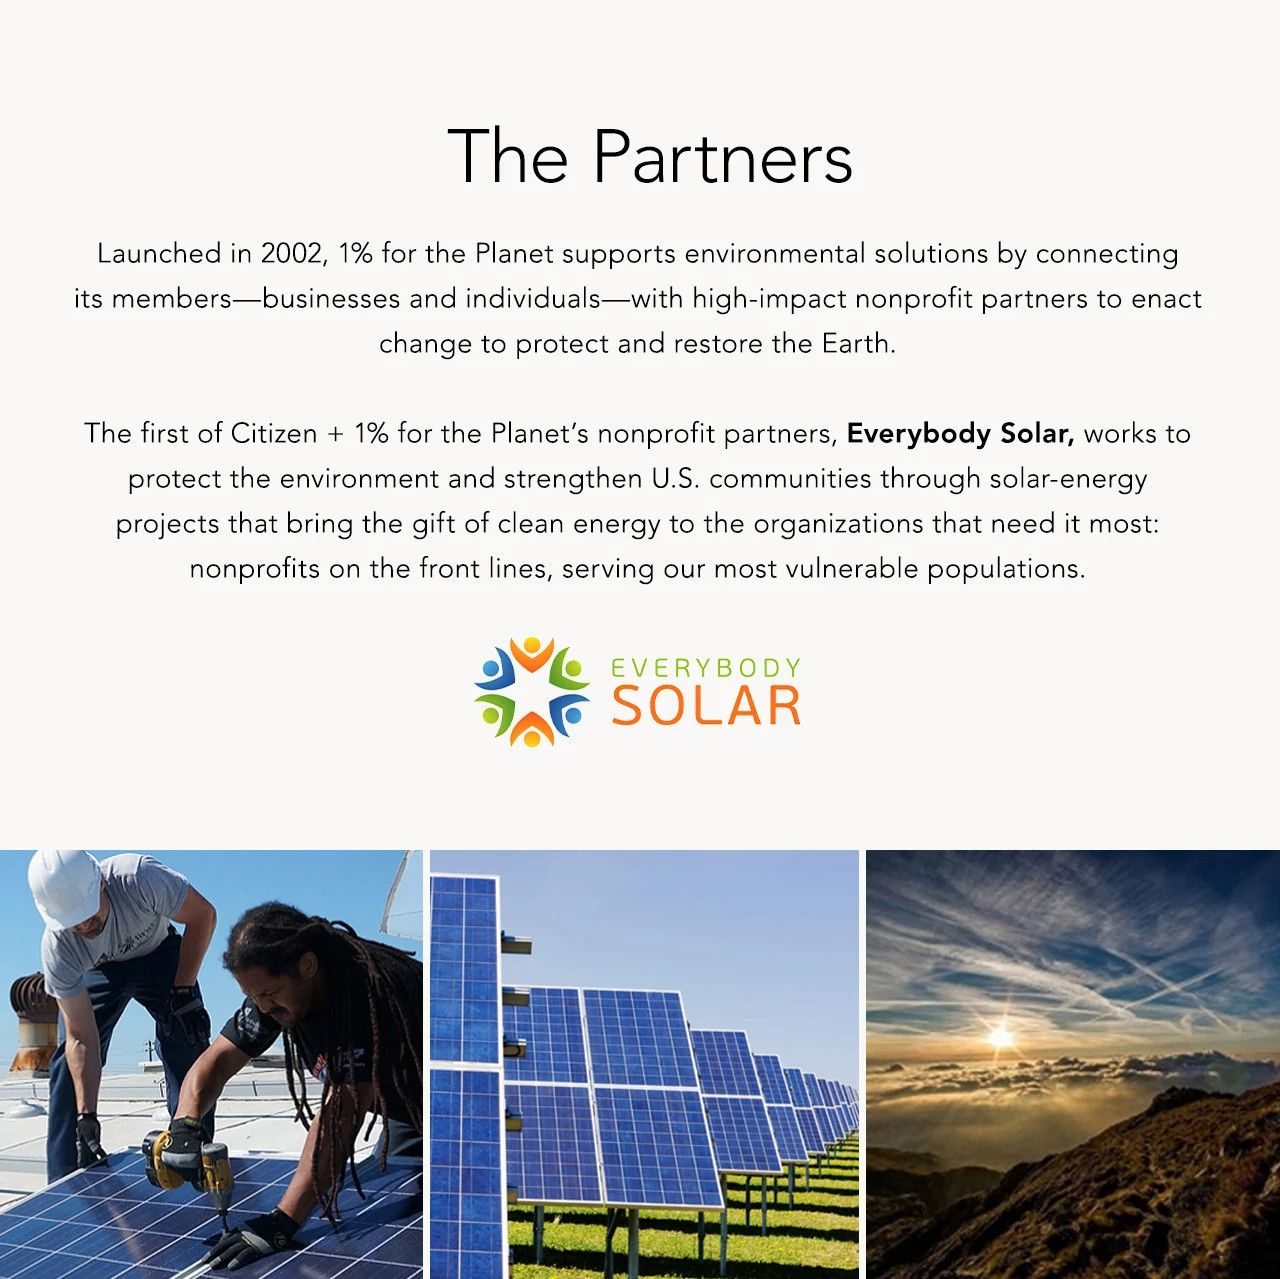 The Partners: Launched in 2002, 1% for the Planet supports environmental solutions by connecting its members—businesses and individuals—with high-impact nonprofit partners to enact change to protect and restore the Earth. The first of Citizen + 1% for the Planet’s nonprofit partners, Everybody Solar, works to protect the environment and strengthen U.S. communities through solar-energy projects that bring the gift of clean energy to the organizations that need it most: nonprofits on the front lines, serving our most vulnerable populations. 